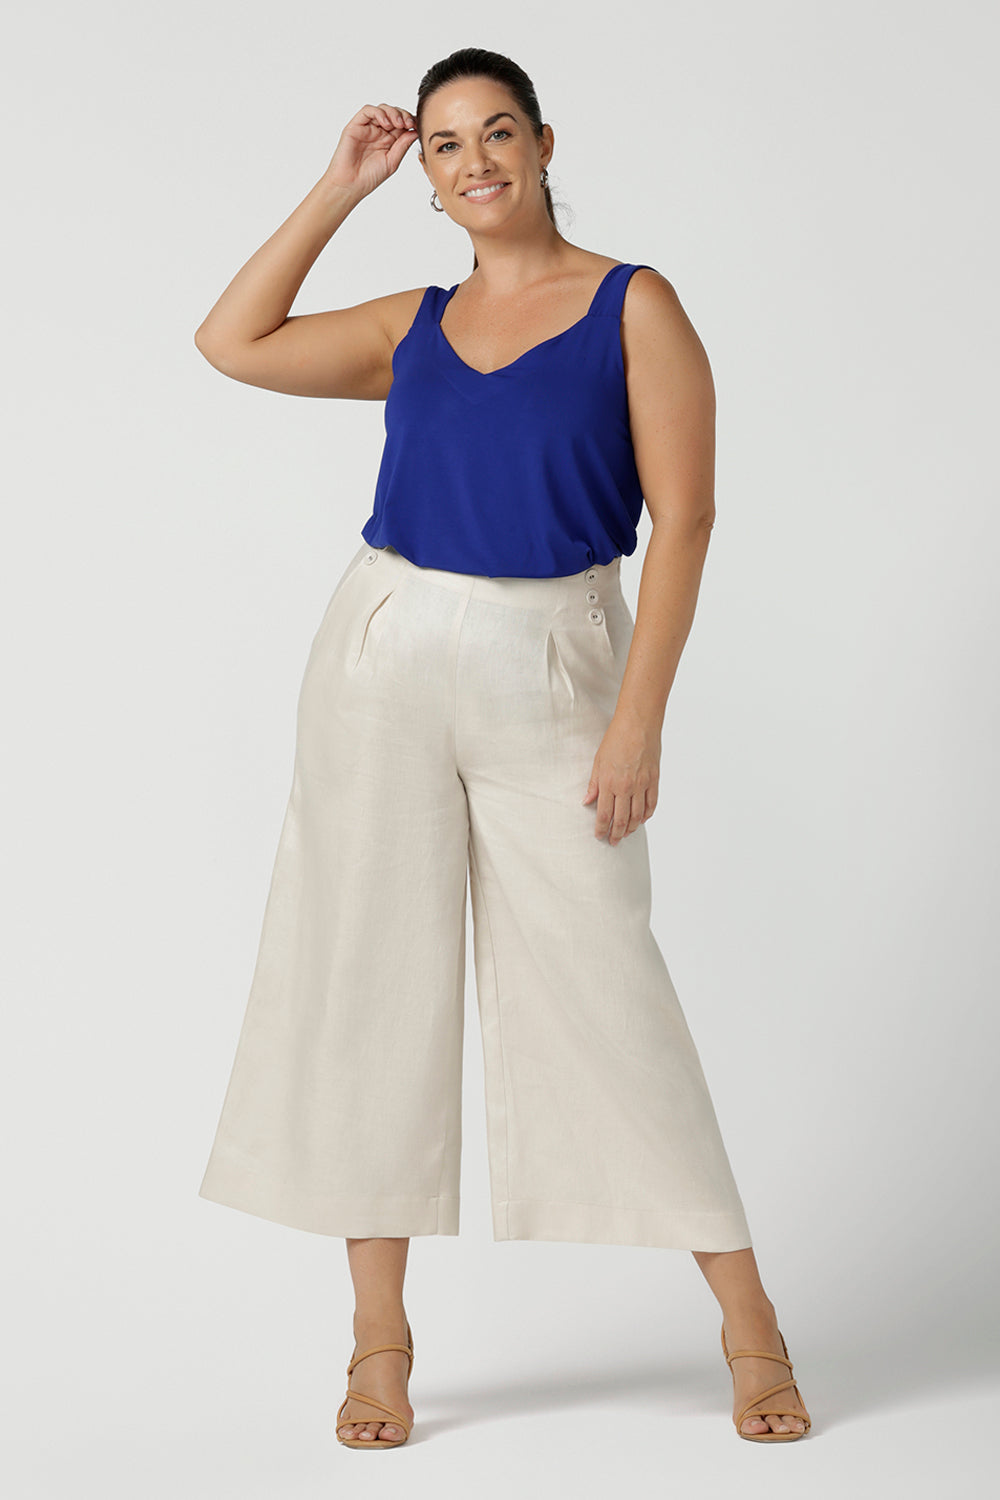 A size 12 woman wears the Nik Pant in Parchment Linen. A high waist tailored pant with buttons and pleats at the front. Made in natural linen a breathable fibre that is great for the warmer months. Styled back with a Cobalt Eddy Cami top. Made in Australia for women size 8 - 24.